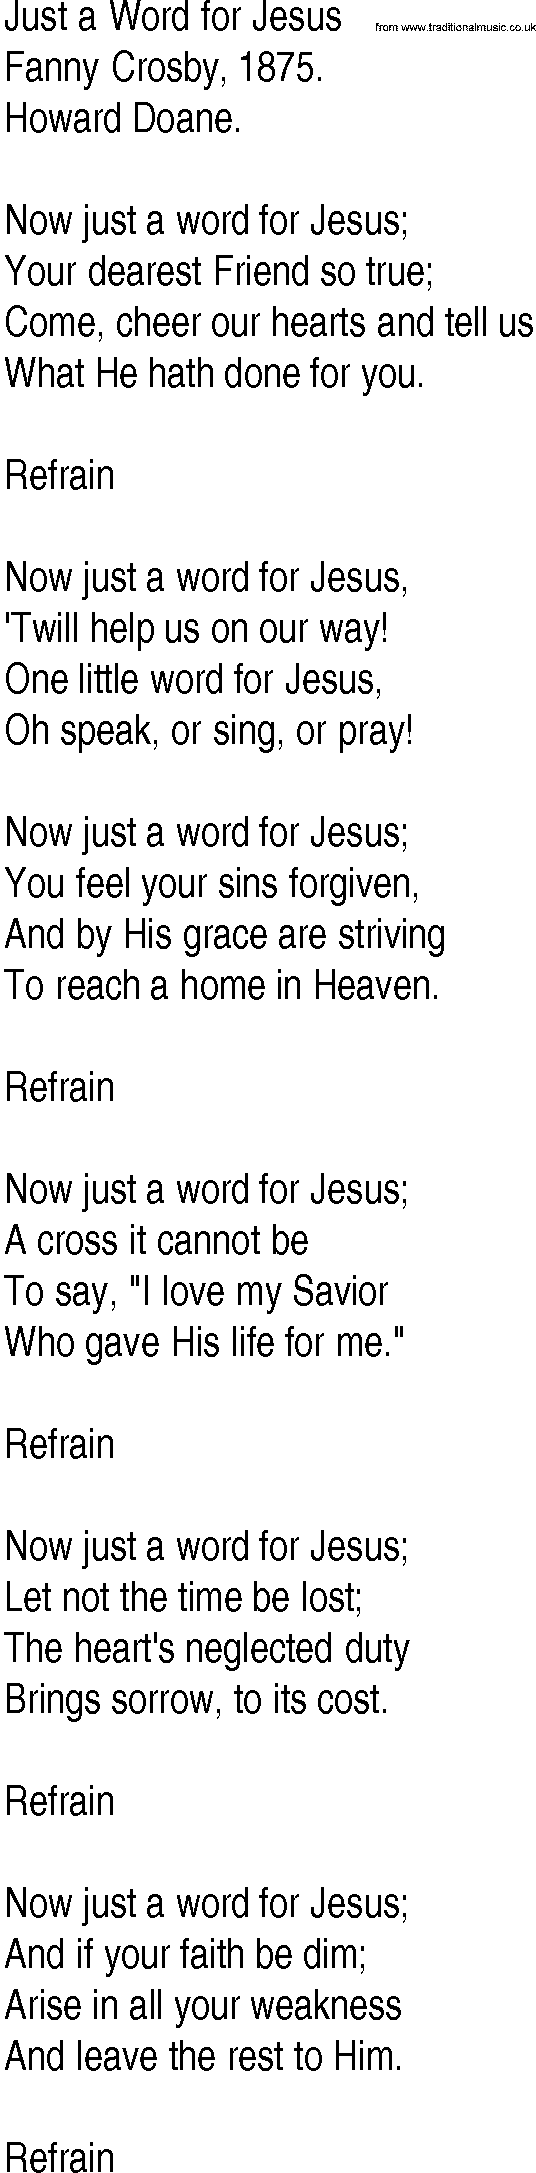 Hymn and Gospel Song: Just a Word for Jesus by Fanny Crosby lyrics